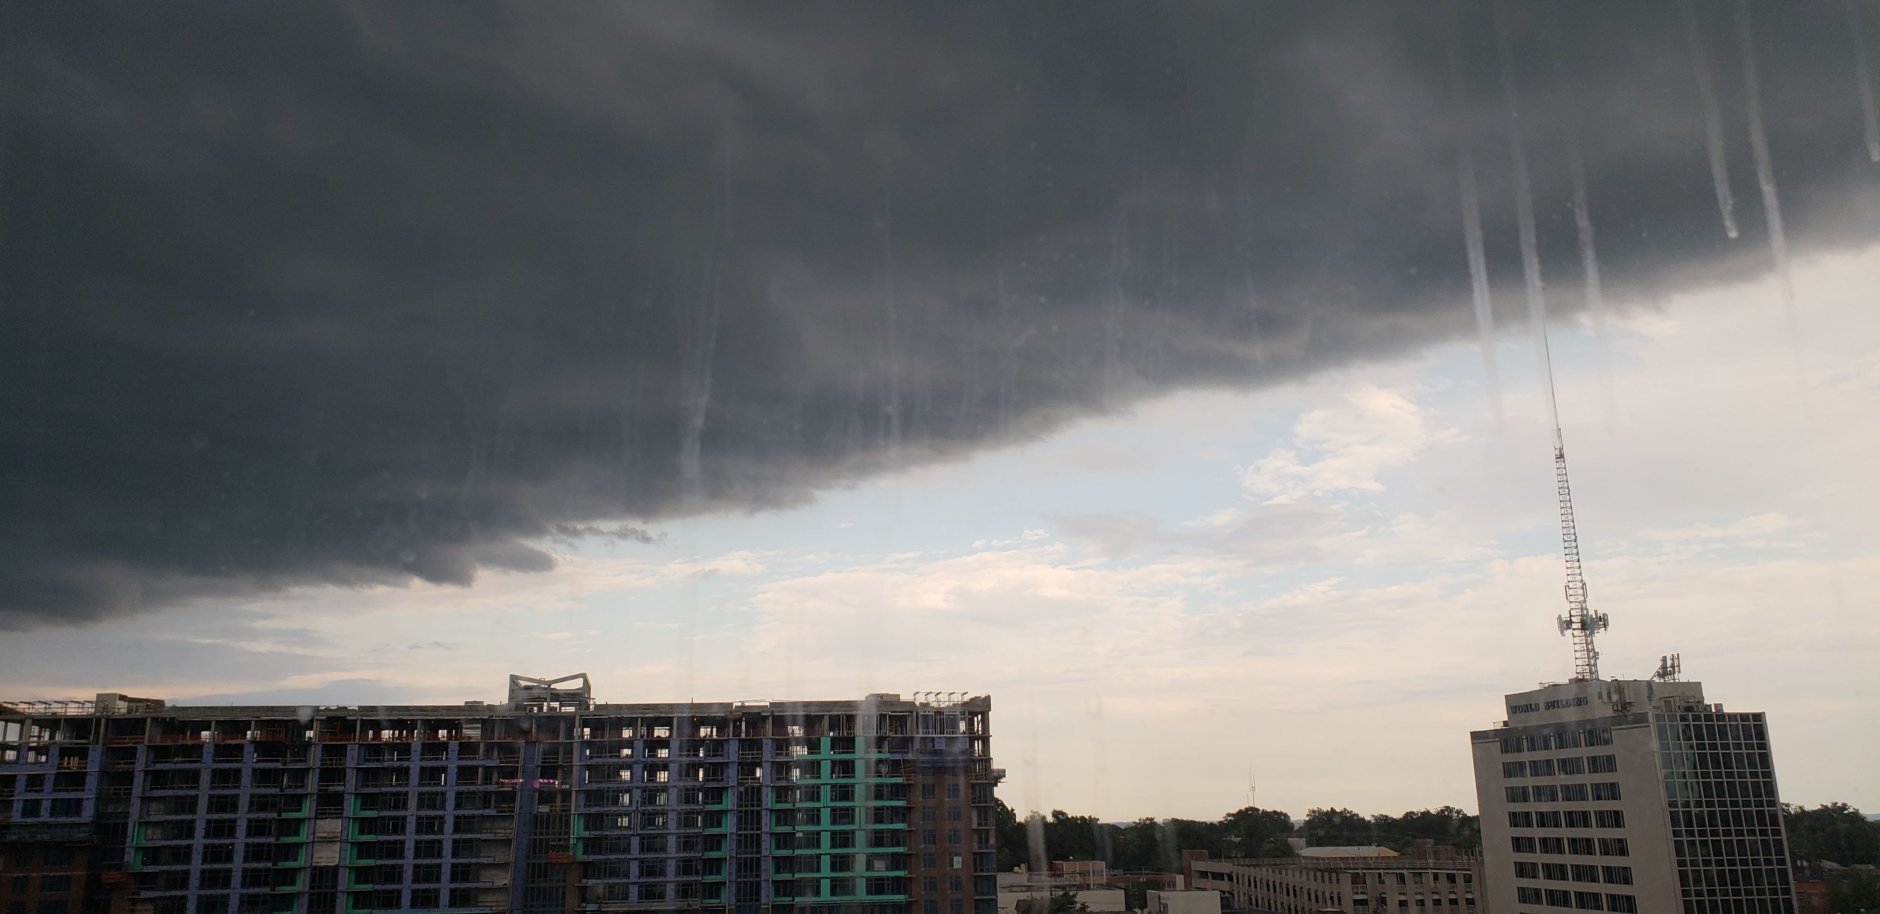 Teresa Collier said, "A storm is coming to downtown Silver Spring," on Friday, July 27, 2018. (Courtesy Teresa Collier)